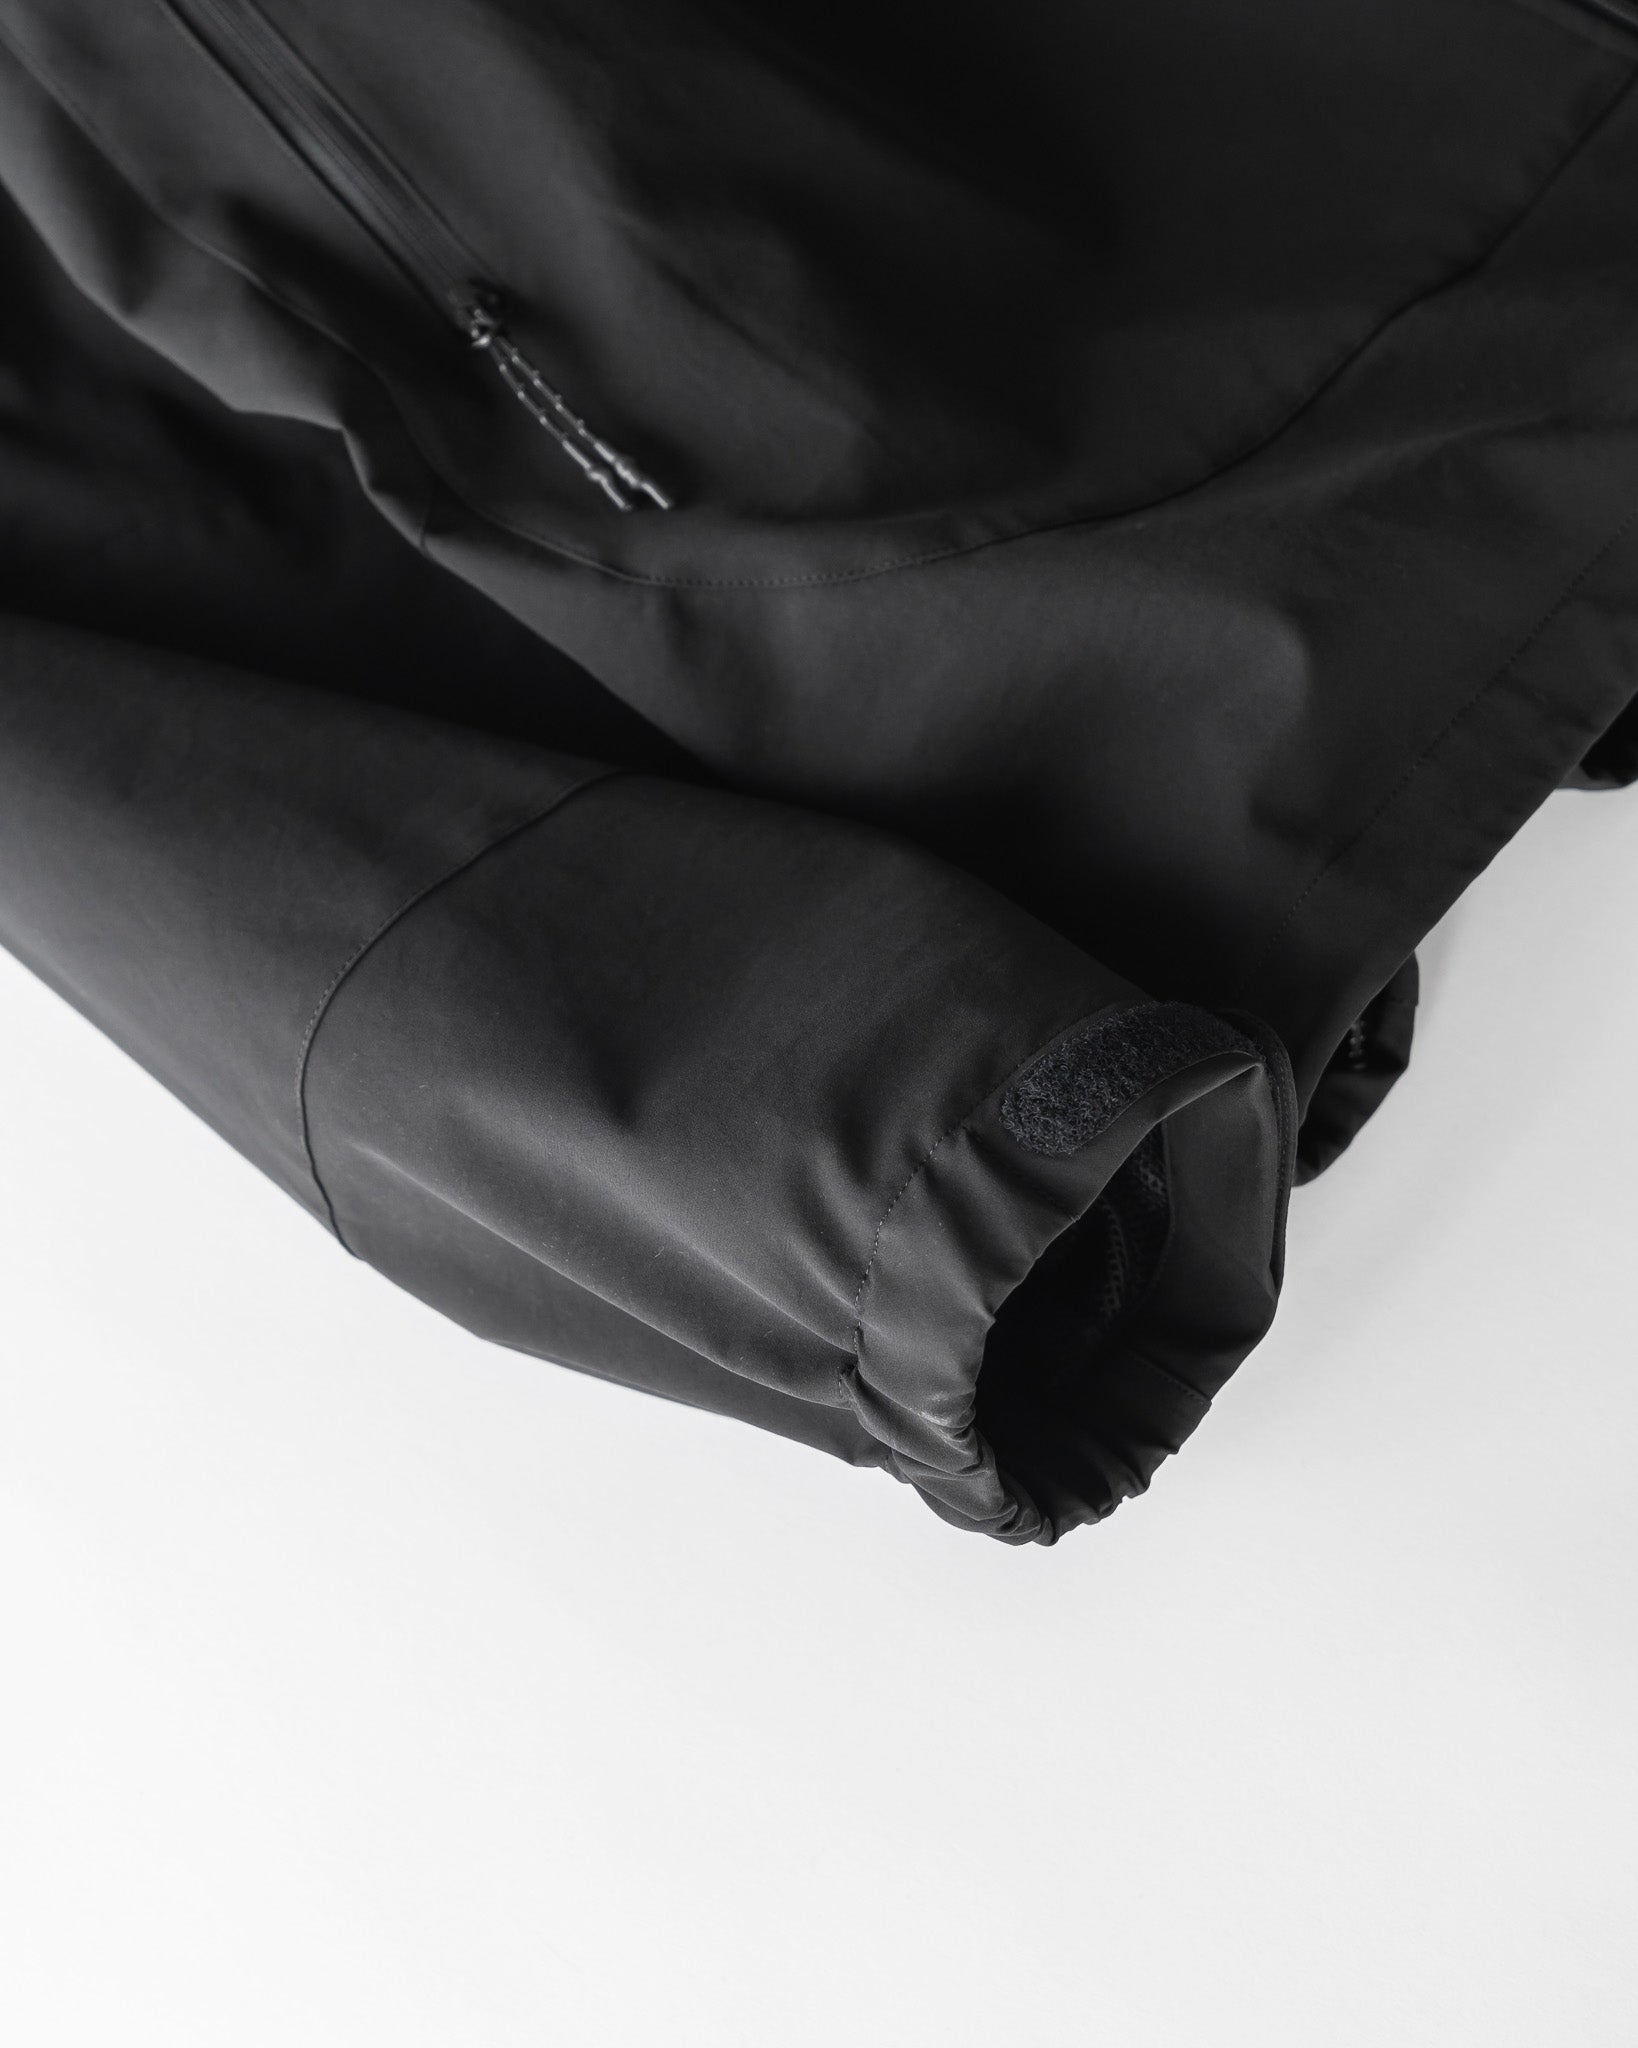 【2.10 sat 20:00- In stock】SOFTSHELL MILITARY JACKET